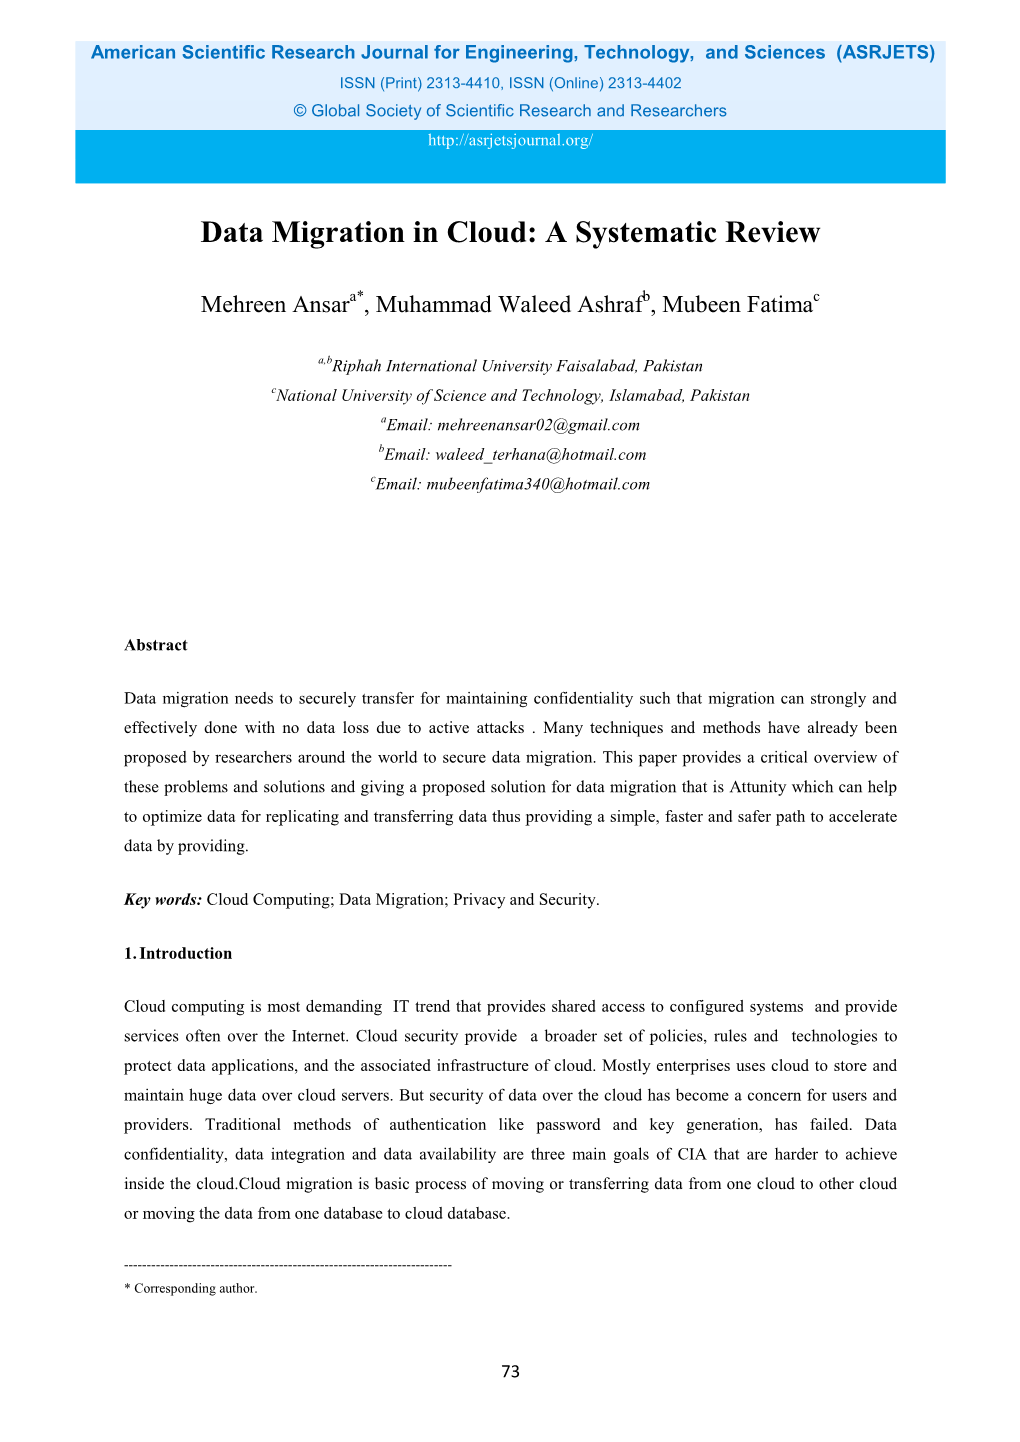 Data Migration in Cloud: a Systematic Review